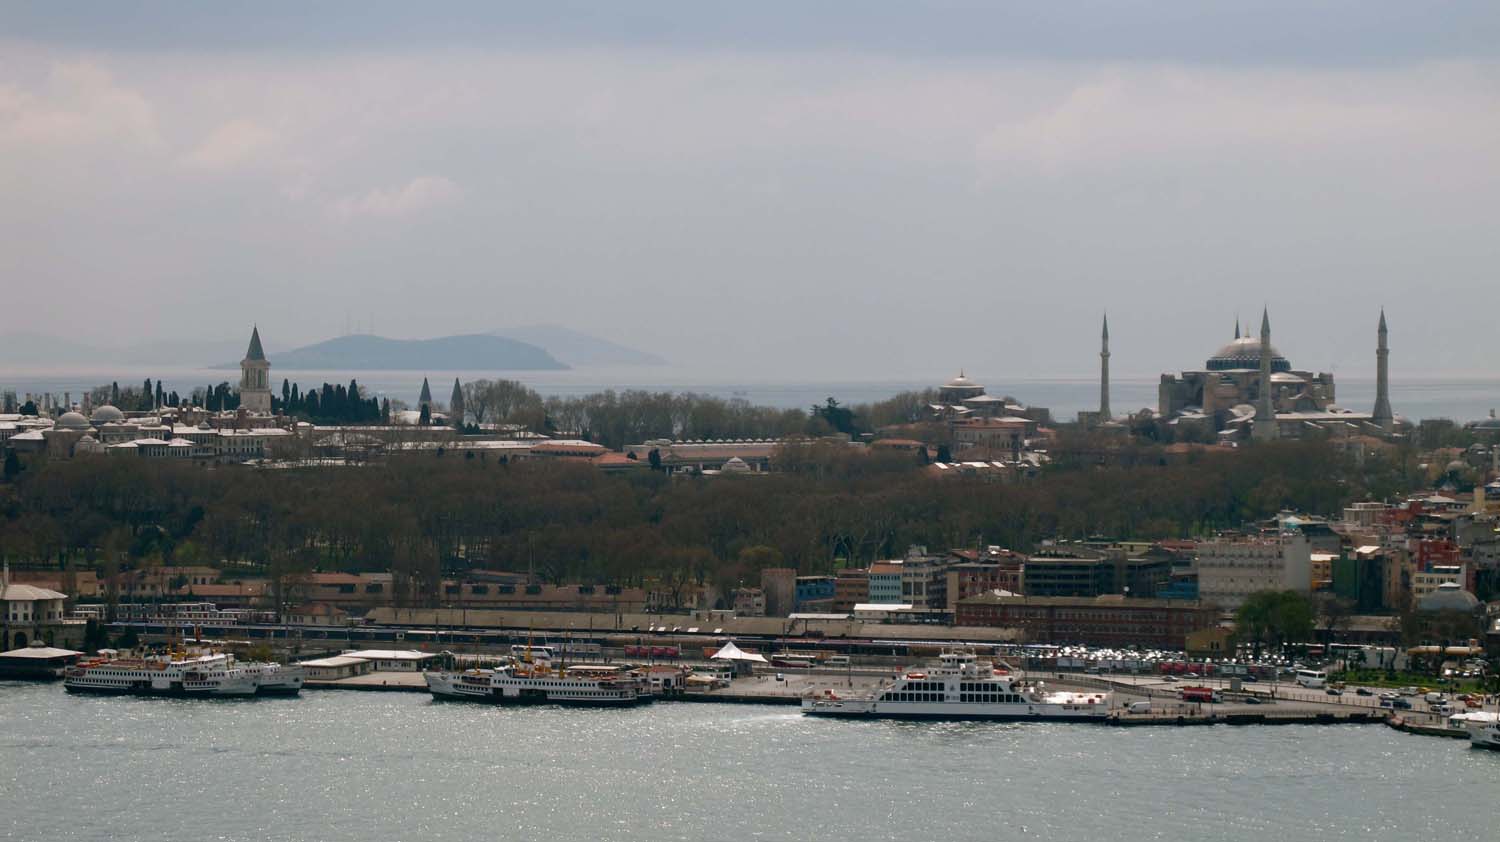 Distant view of Topkapi Palace and Hagia Sofia from Galata Tower